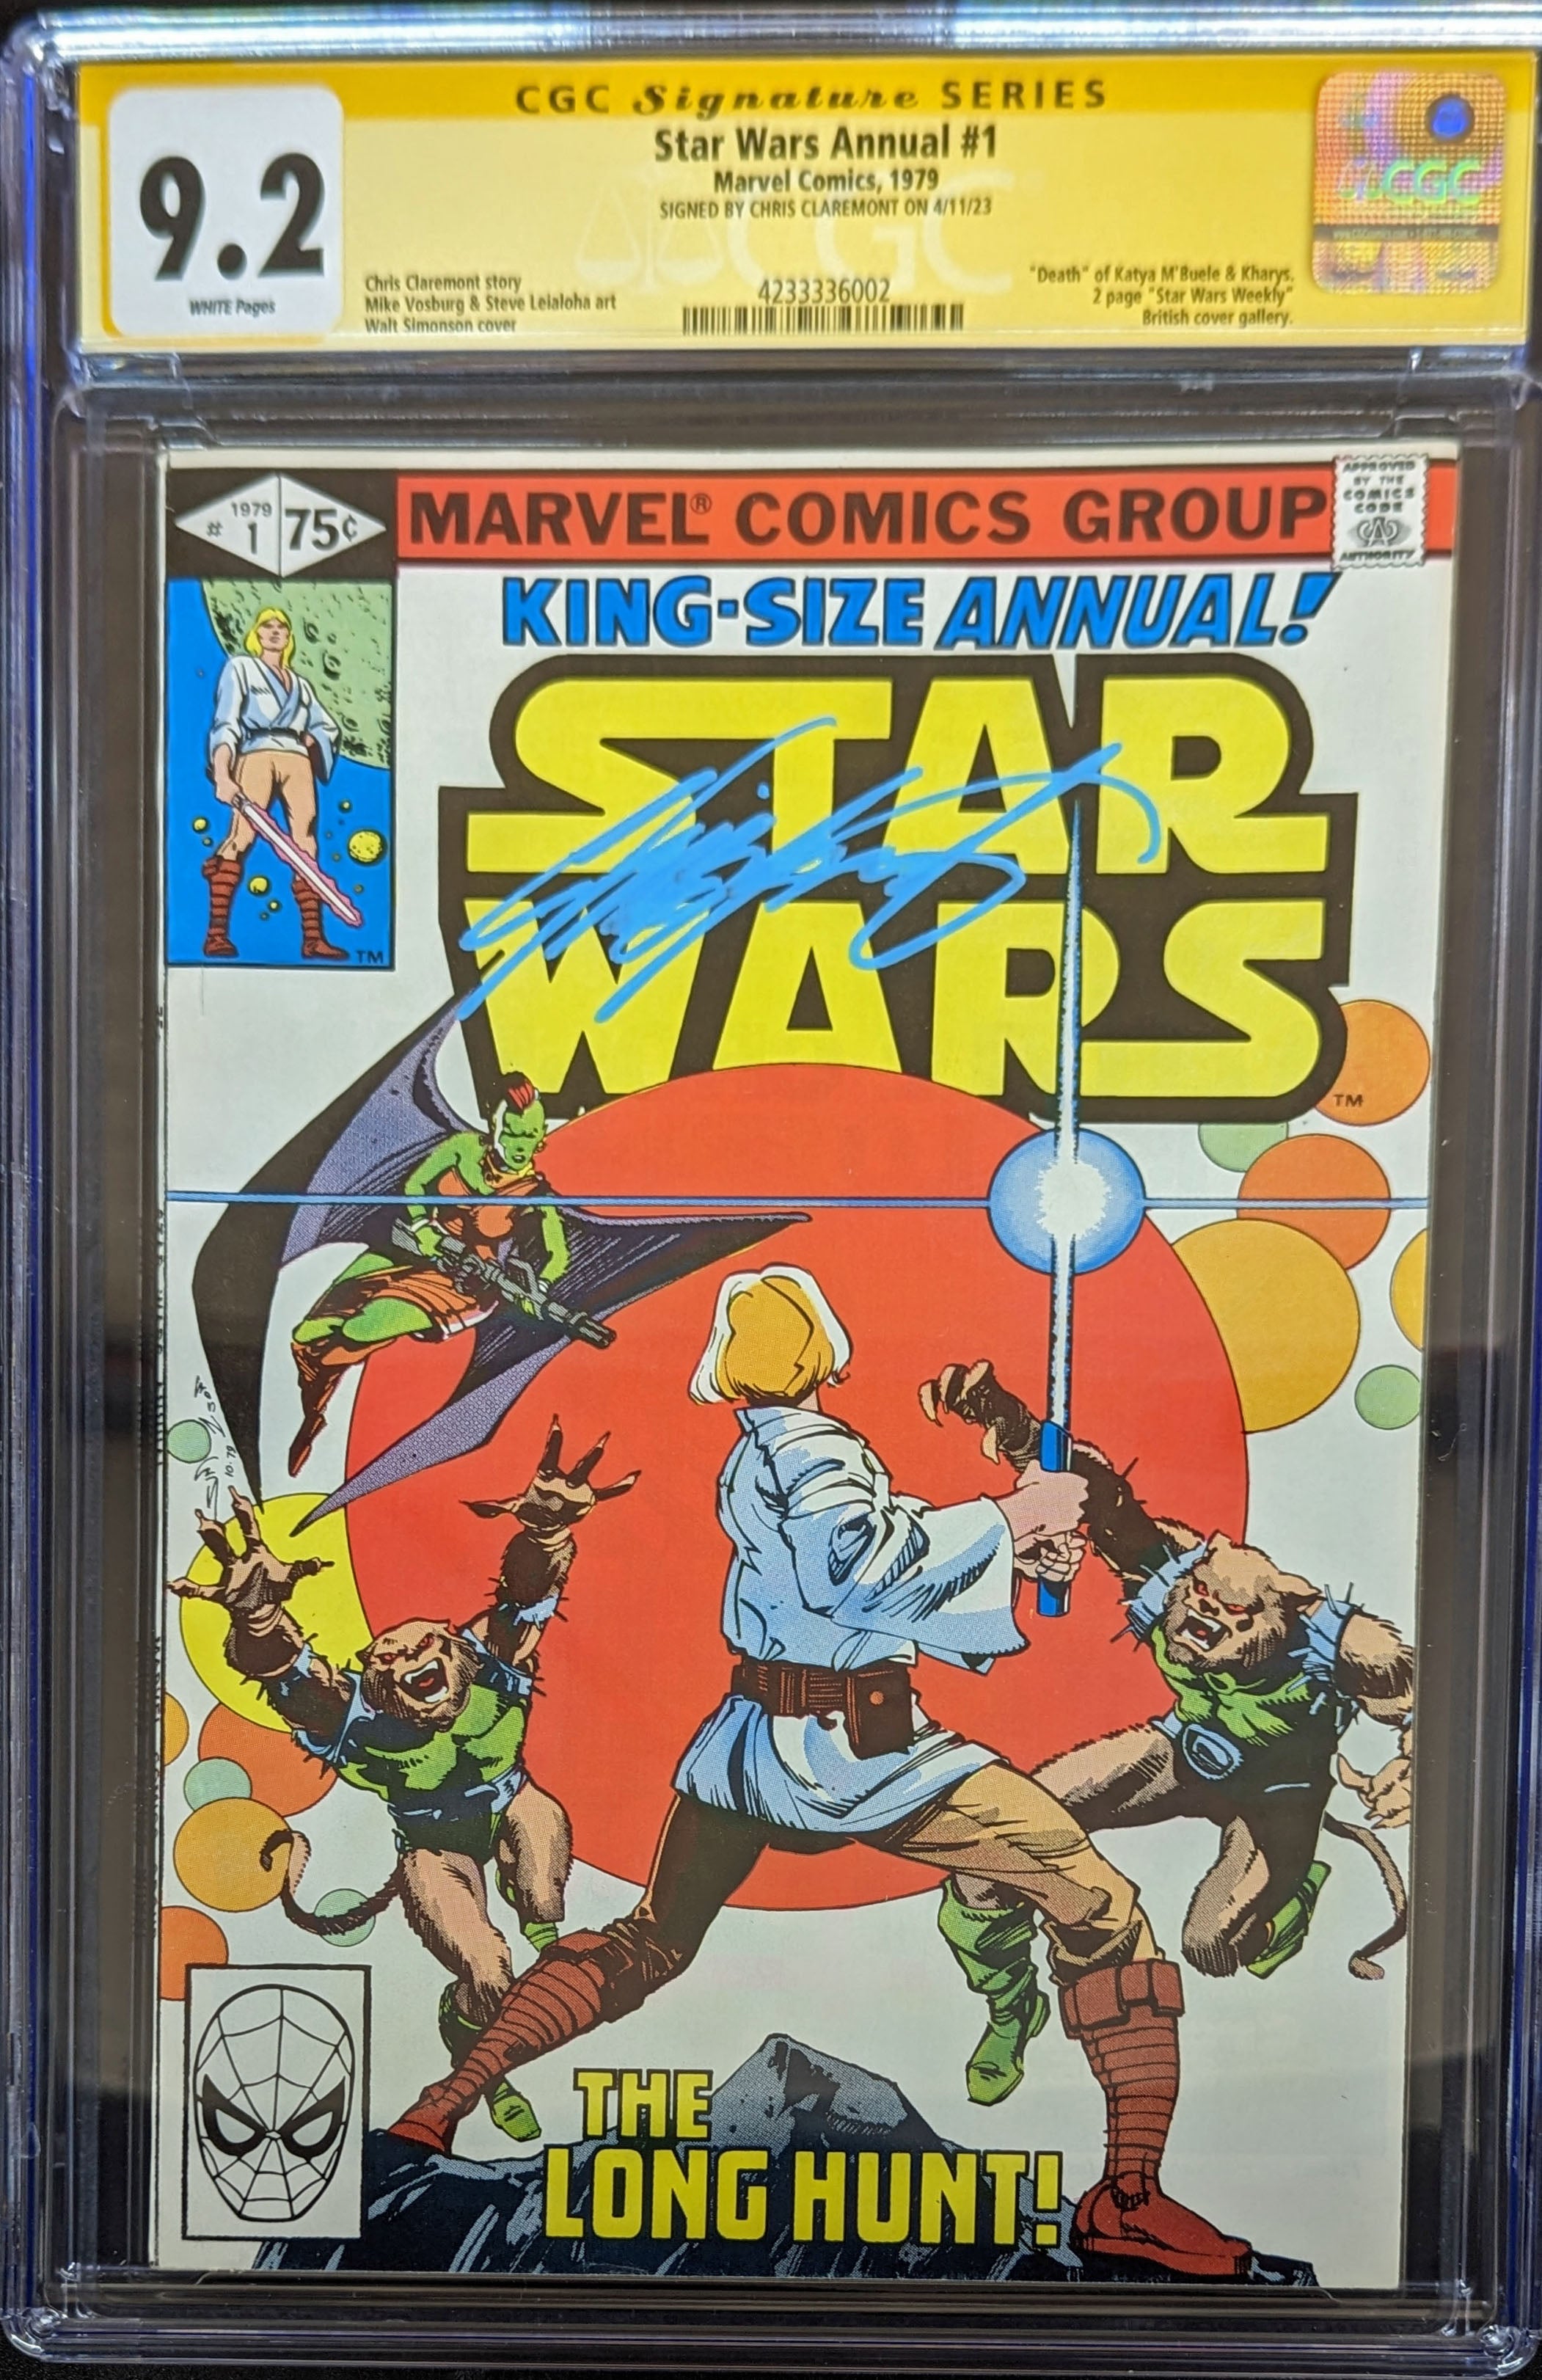 Star Wars Annual #1 (1979) CGC 9.2 Signed by Chris Claremont